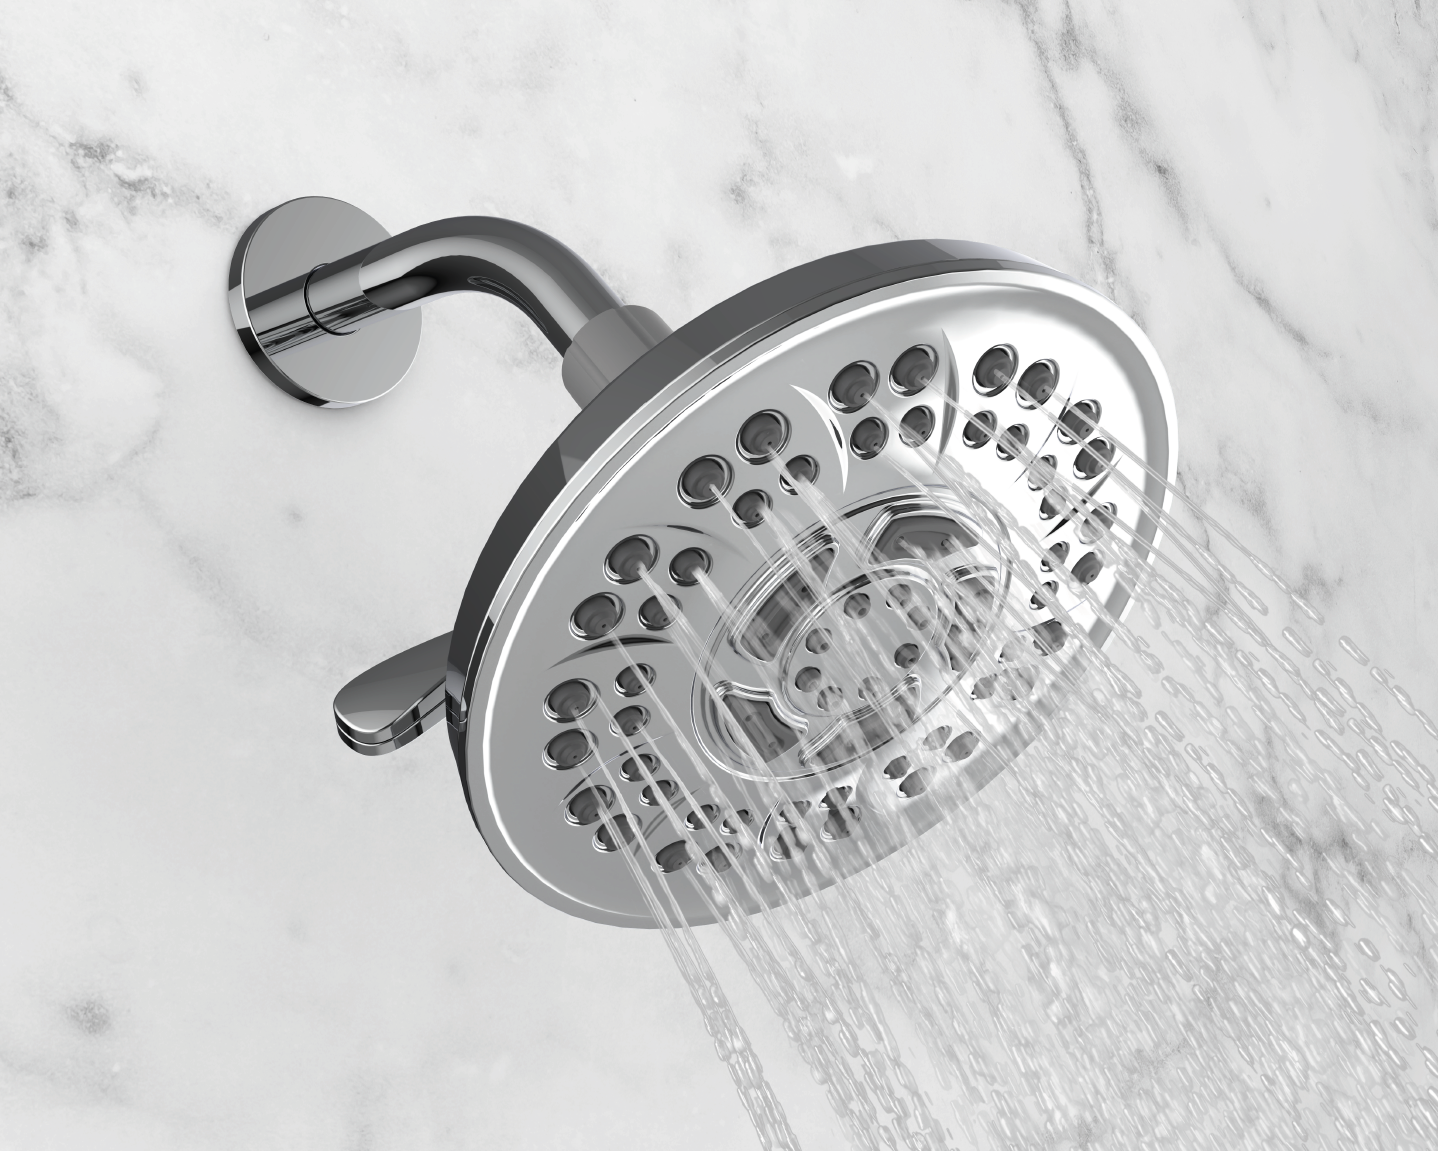 Chrome (Metallic Finish) shower head with water flowing out. Made with up to 10% recycled nearshore ocean plastic.